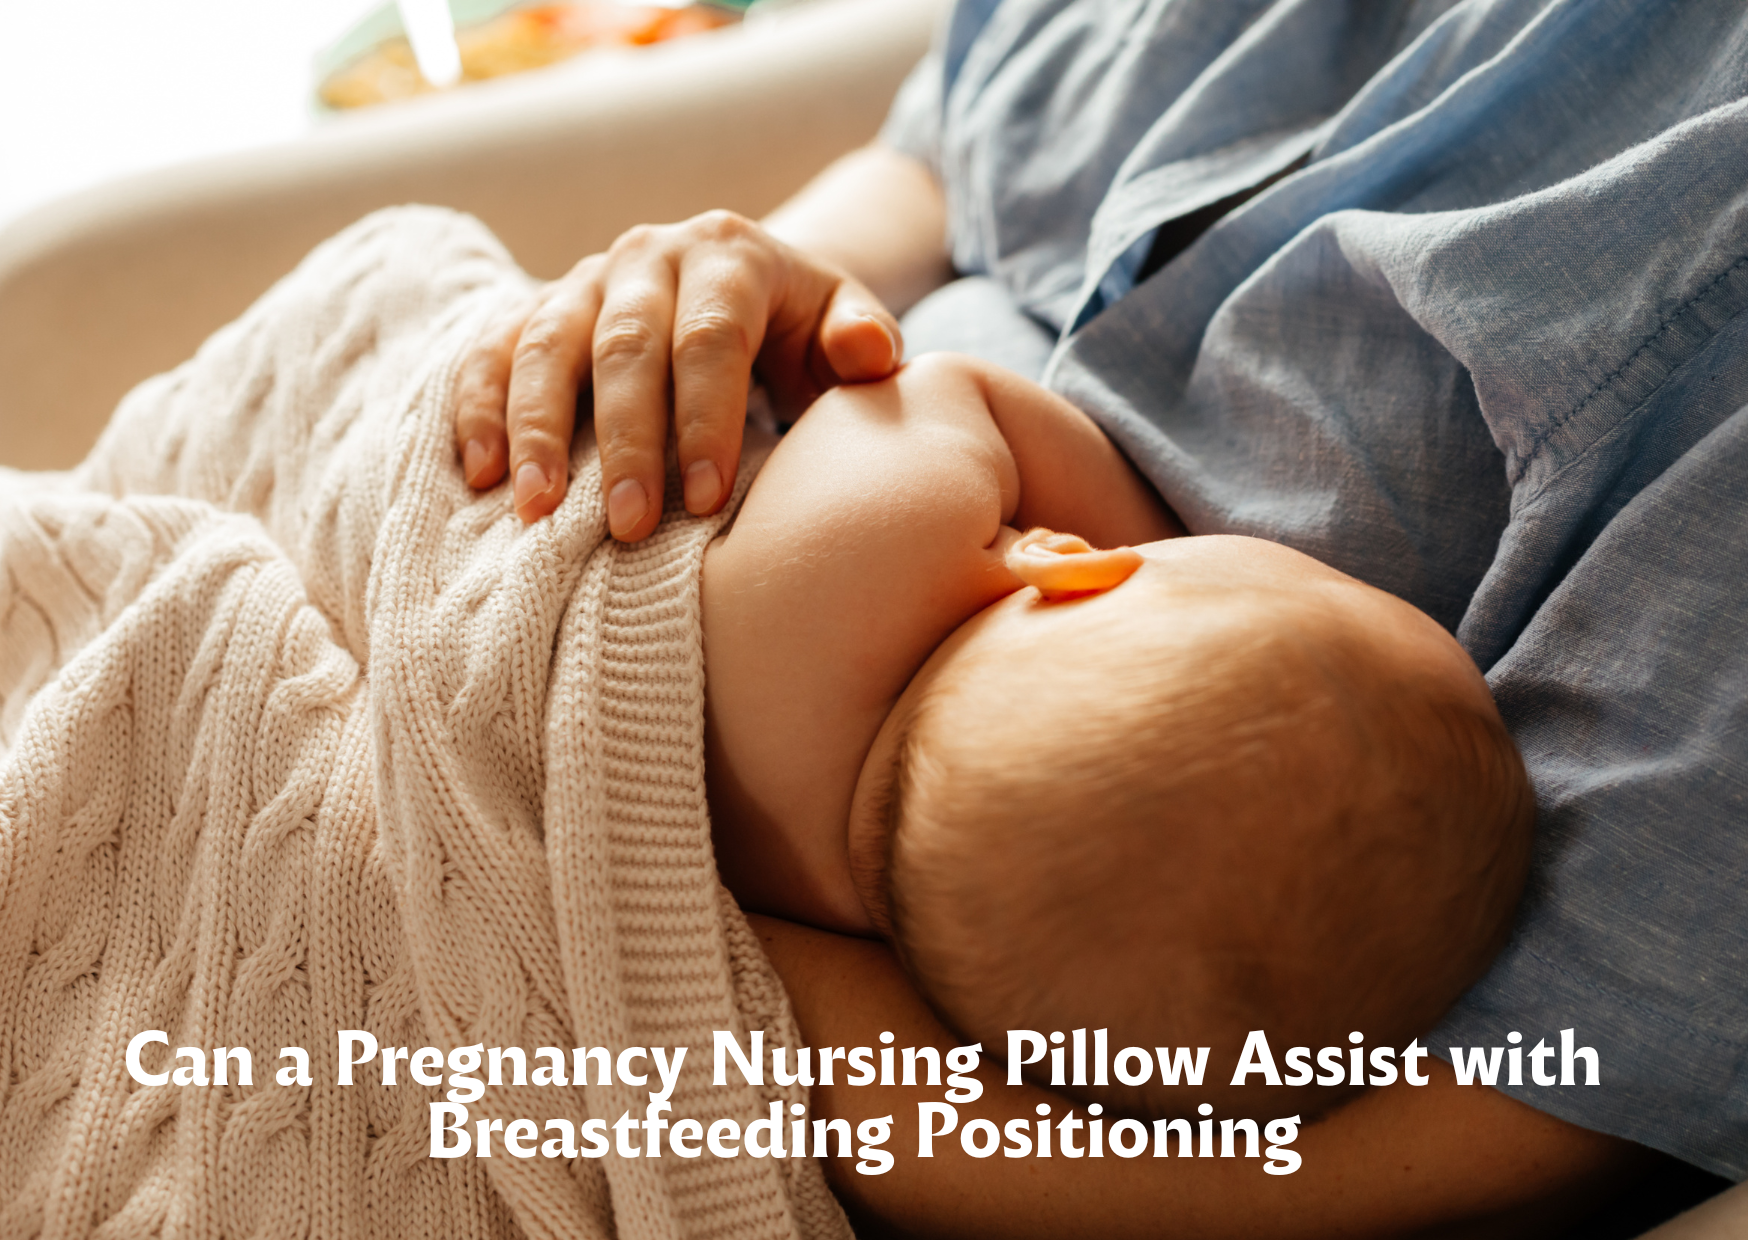 Can a Pregnancy Nursing Pillow Assist with Breastfeeding Positioning